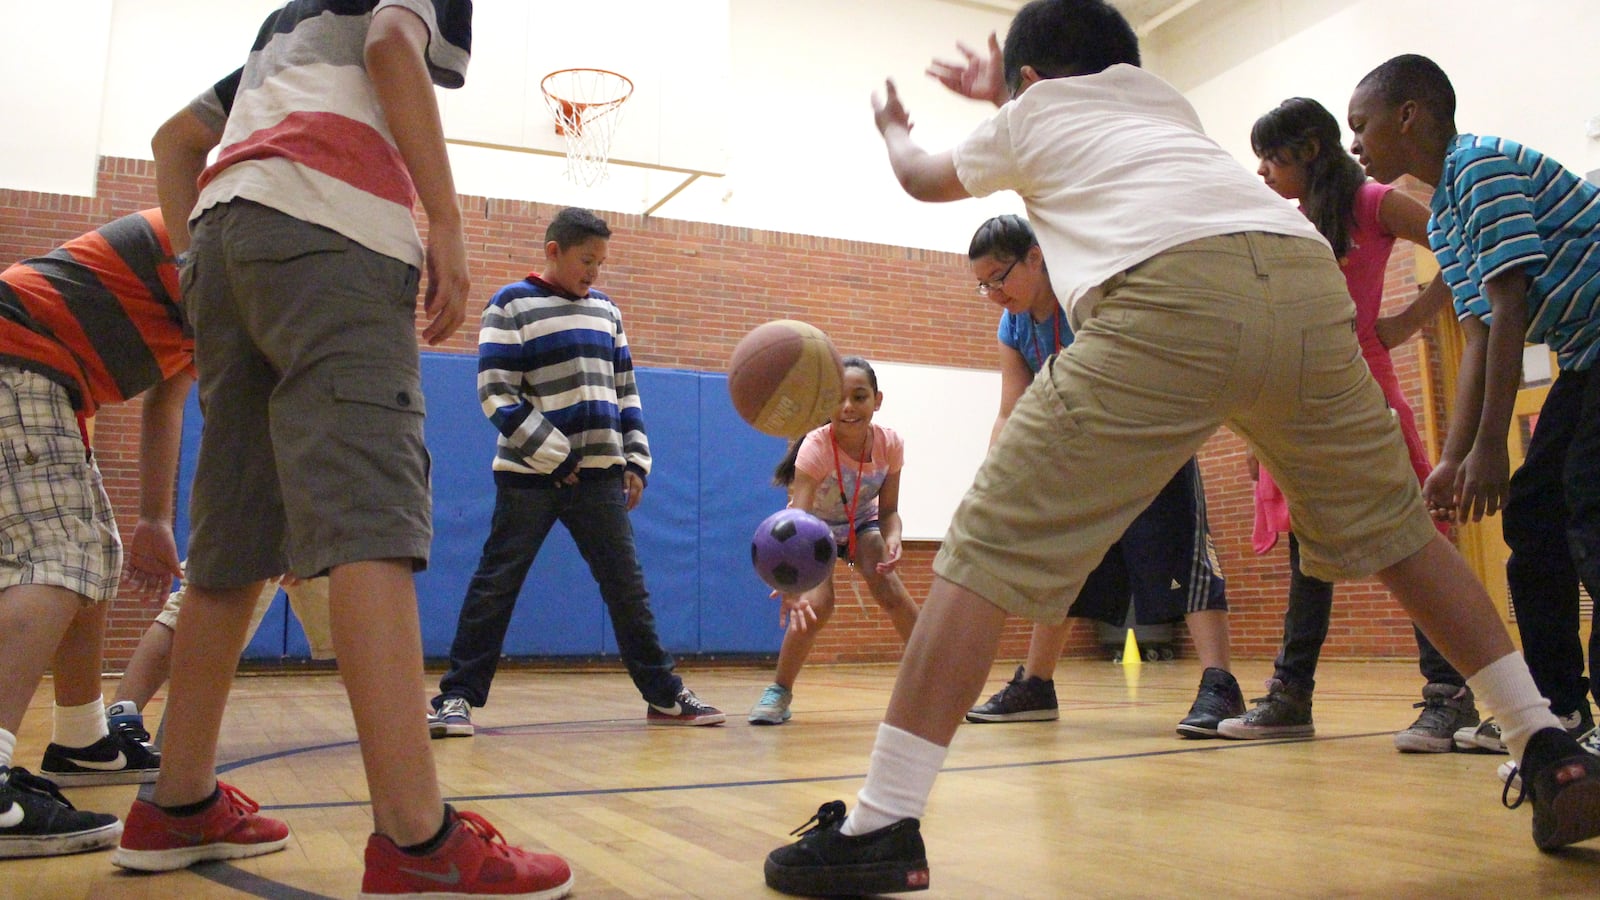 Students practiced their goalie skills by standing in a circle and trying to stop the balls from passing between their feet. This activity was offered by YMCA.